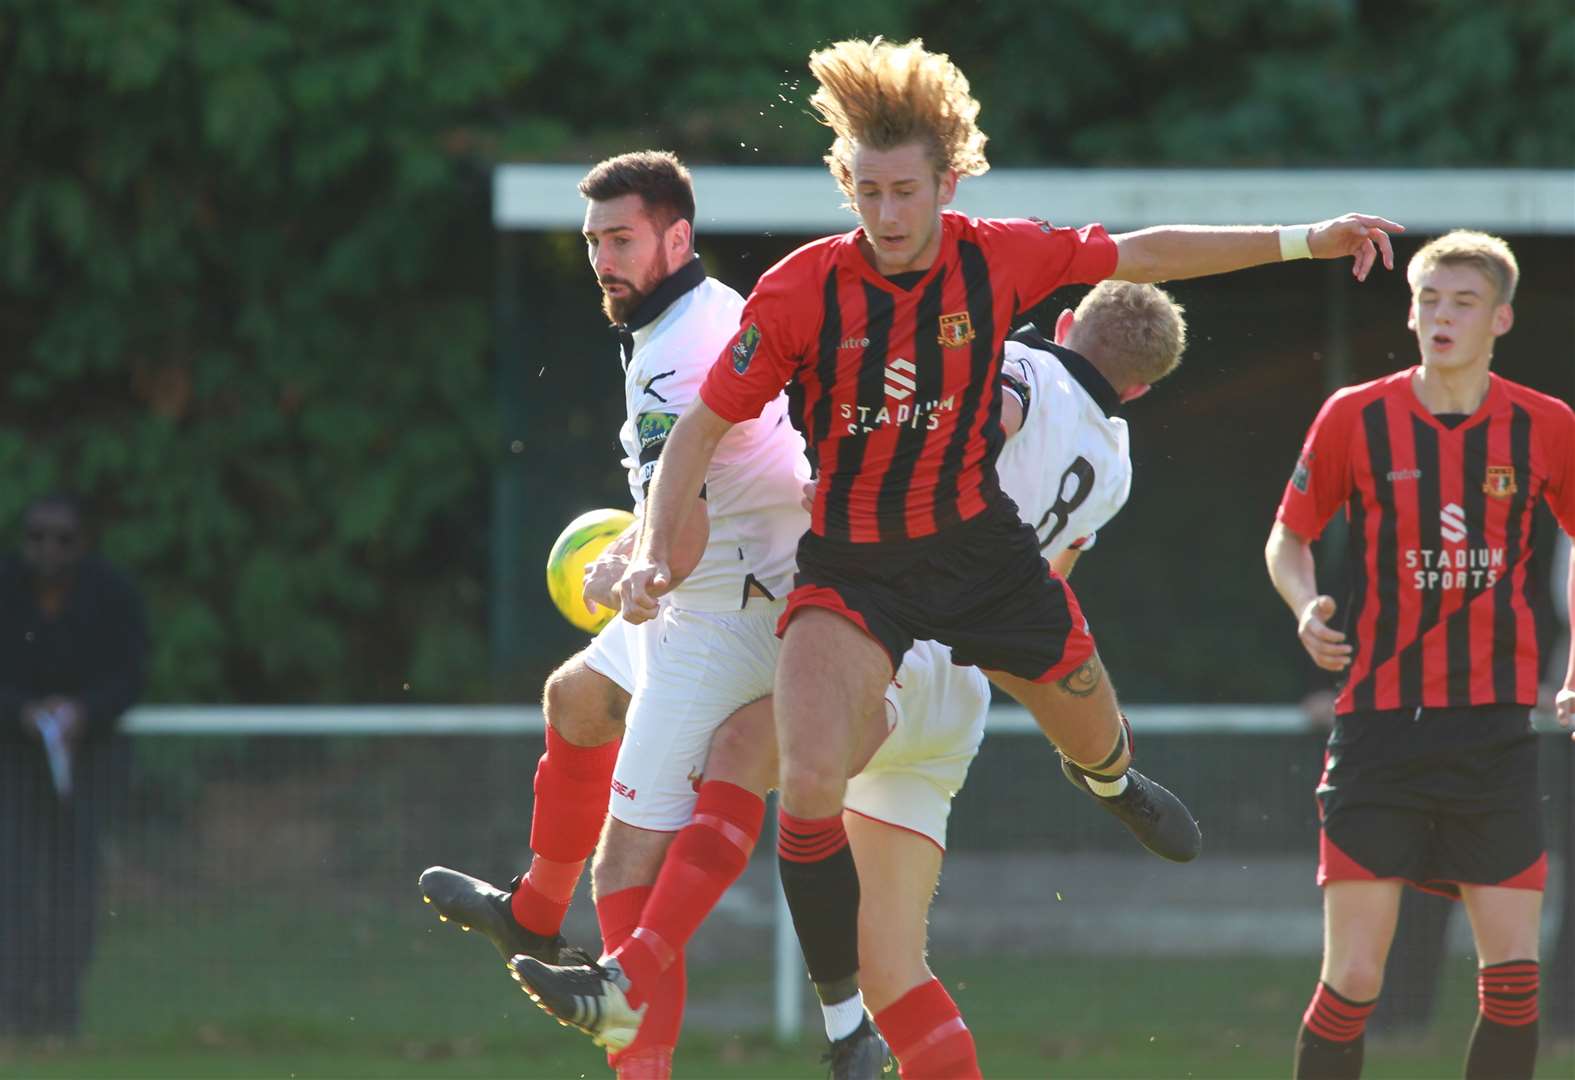 Luke Wheatley (in white) playing for Ramsgate against Sittingbourne Picture: John Westhrop